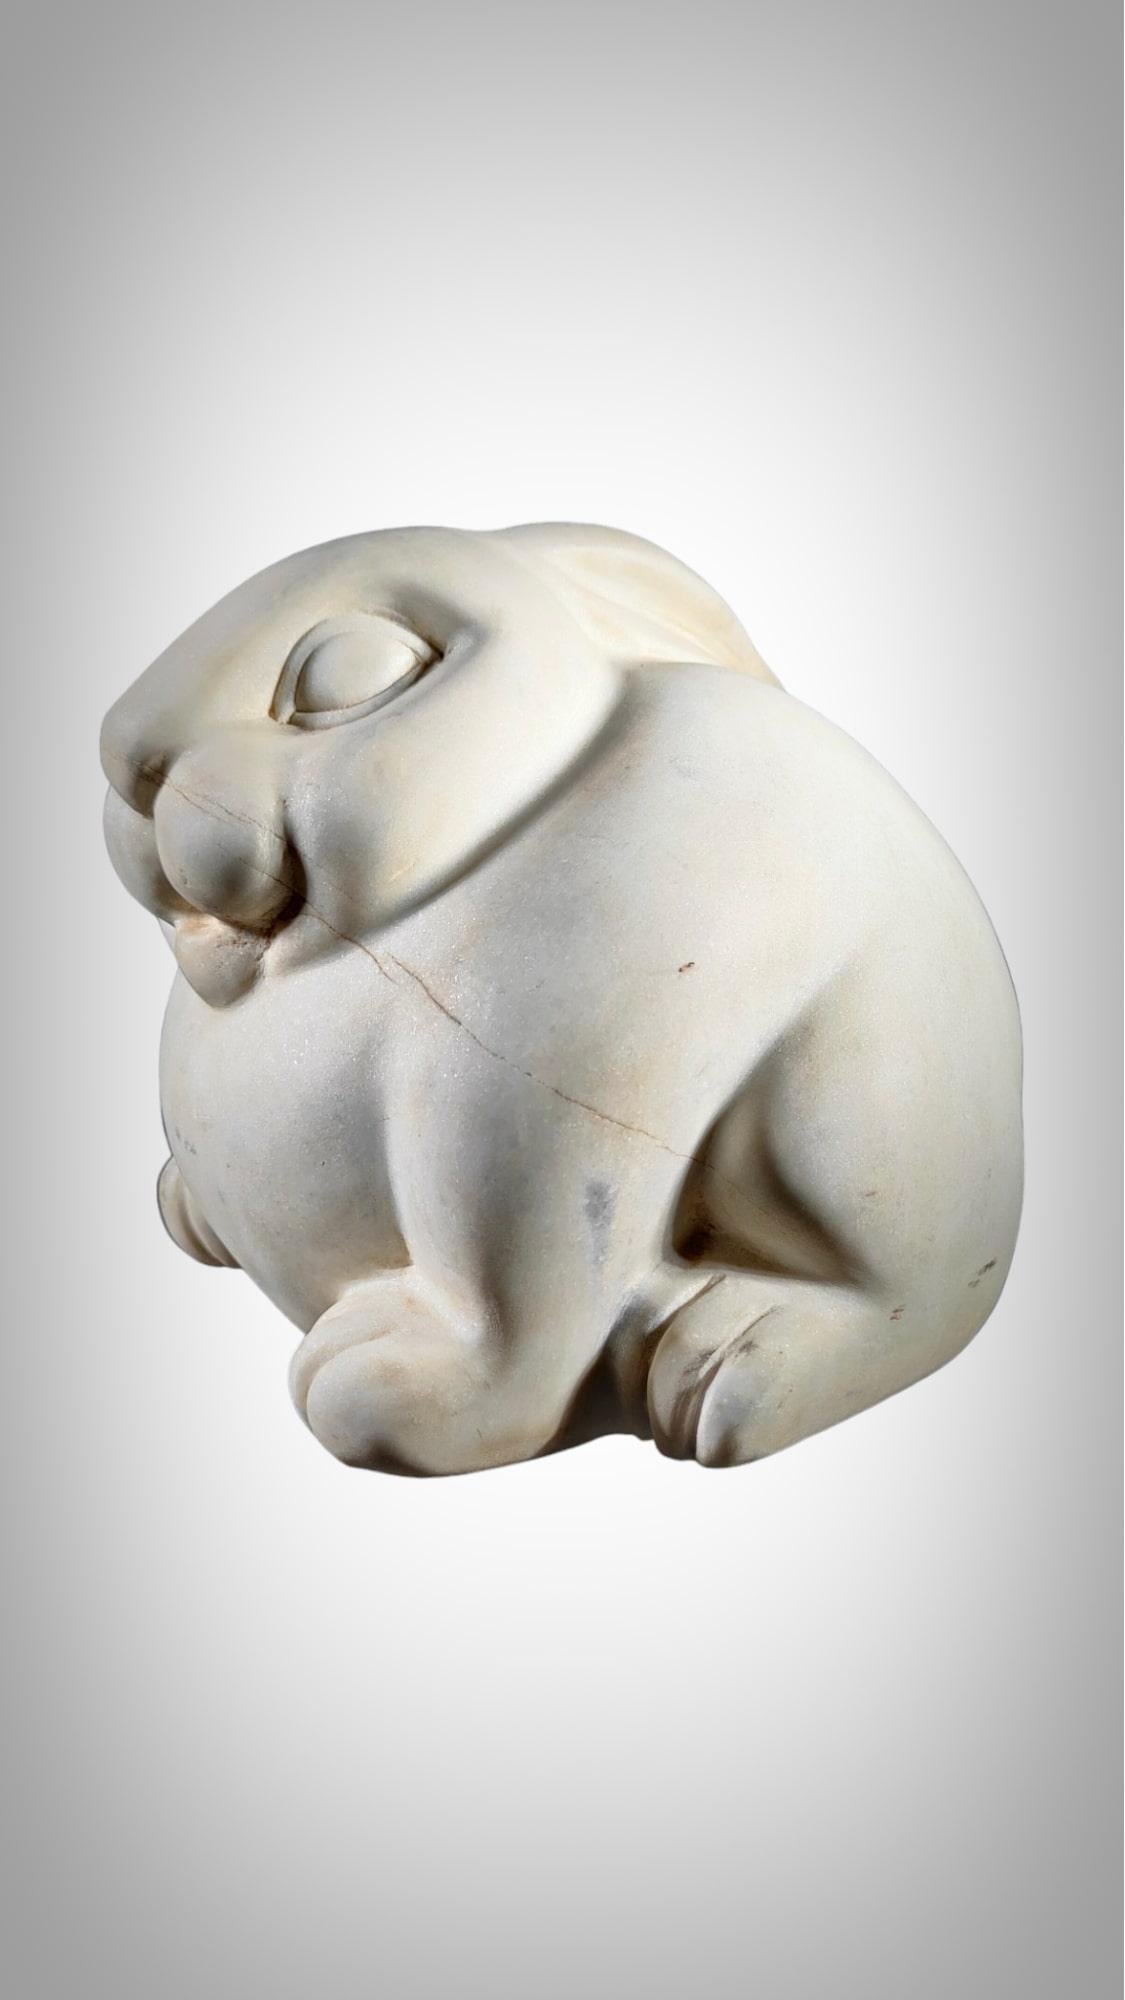 White marble sculpture of a hare Firenze 1840
Decorative sculpture from 1840 by PIetro Freccia (1814-1856) in Firenze. It is made of white Carrara marble. The sculpture is reminiscent of Botero. Measurements: 23x32x30 cm. Good condition in general.